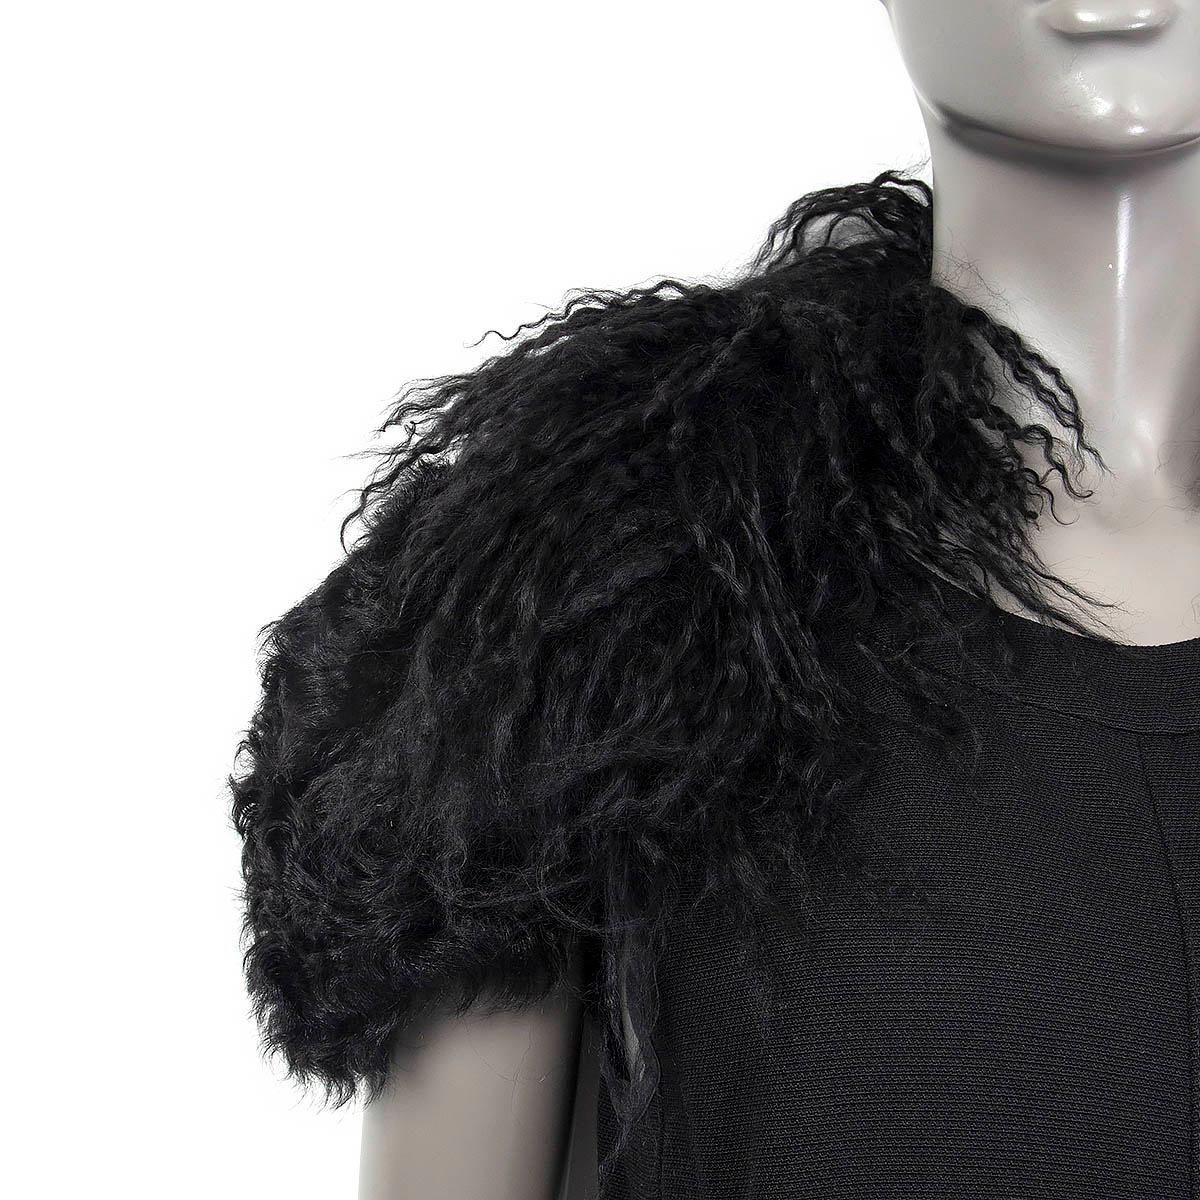 MIU MIU black SHEARLING FUR STOLE Shawl Scarf In Excellent Condition For Sale In Zürich, CH